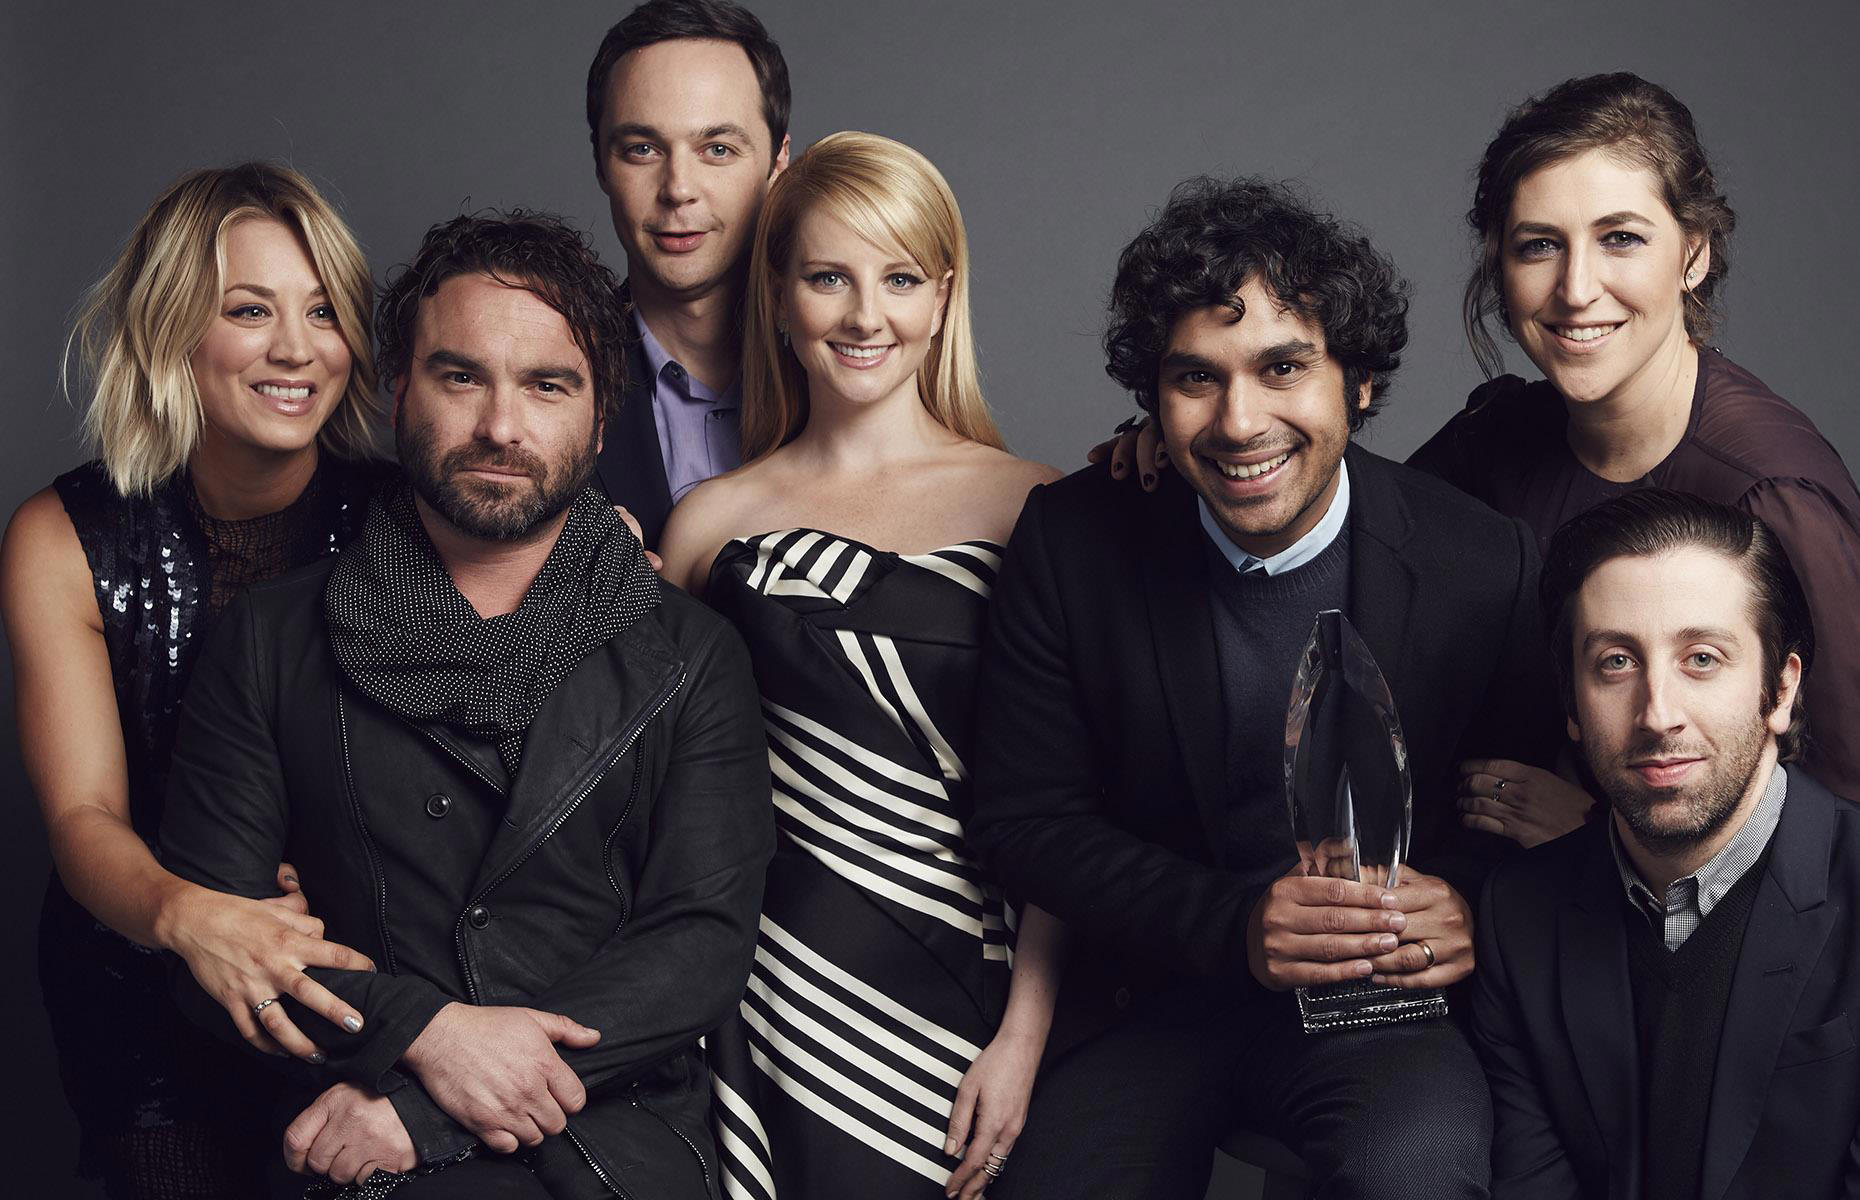 Who's the richest The Big Bang Theory cast member today?